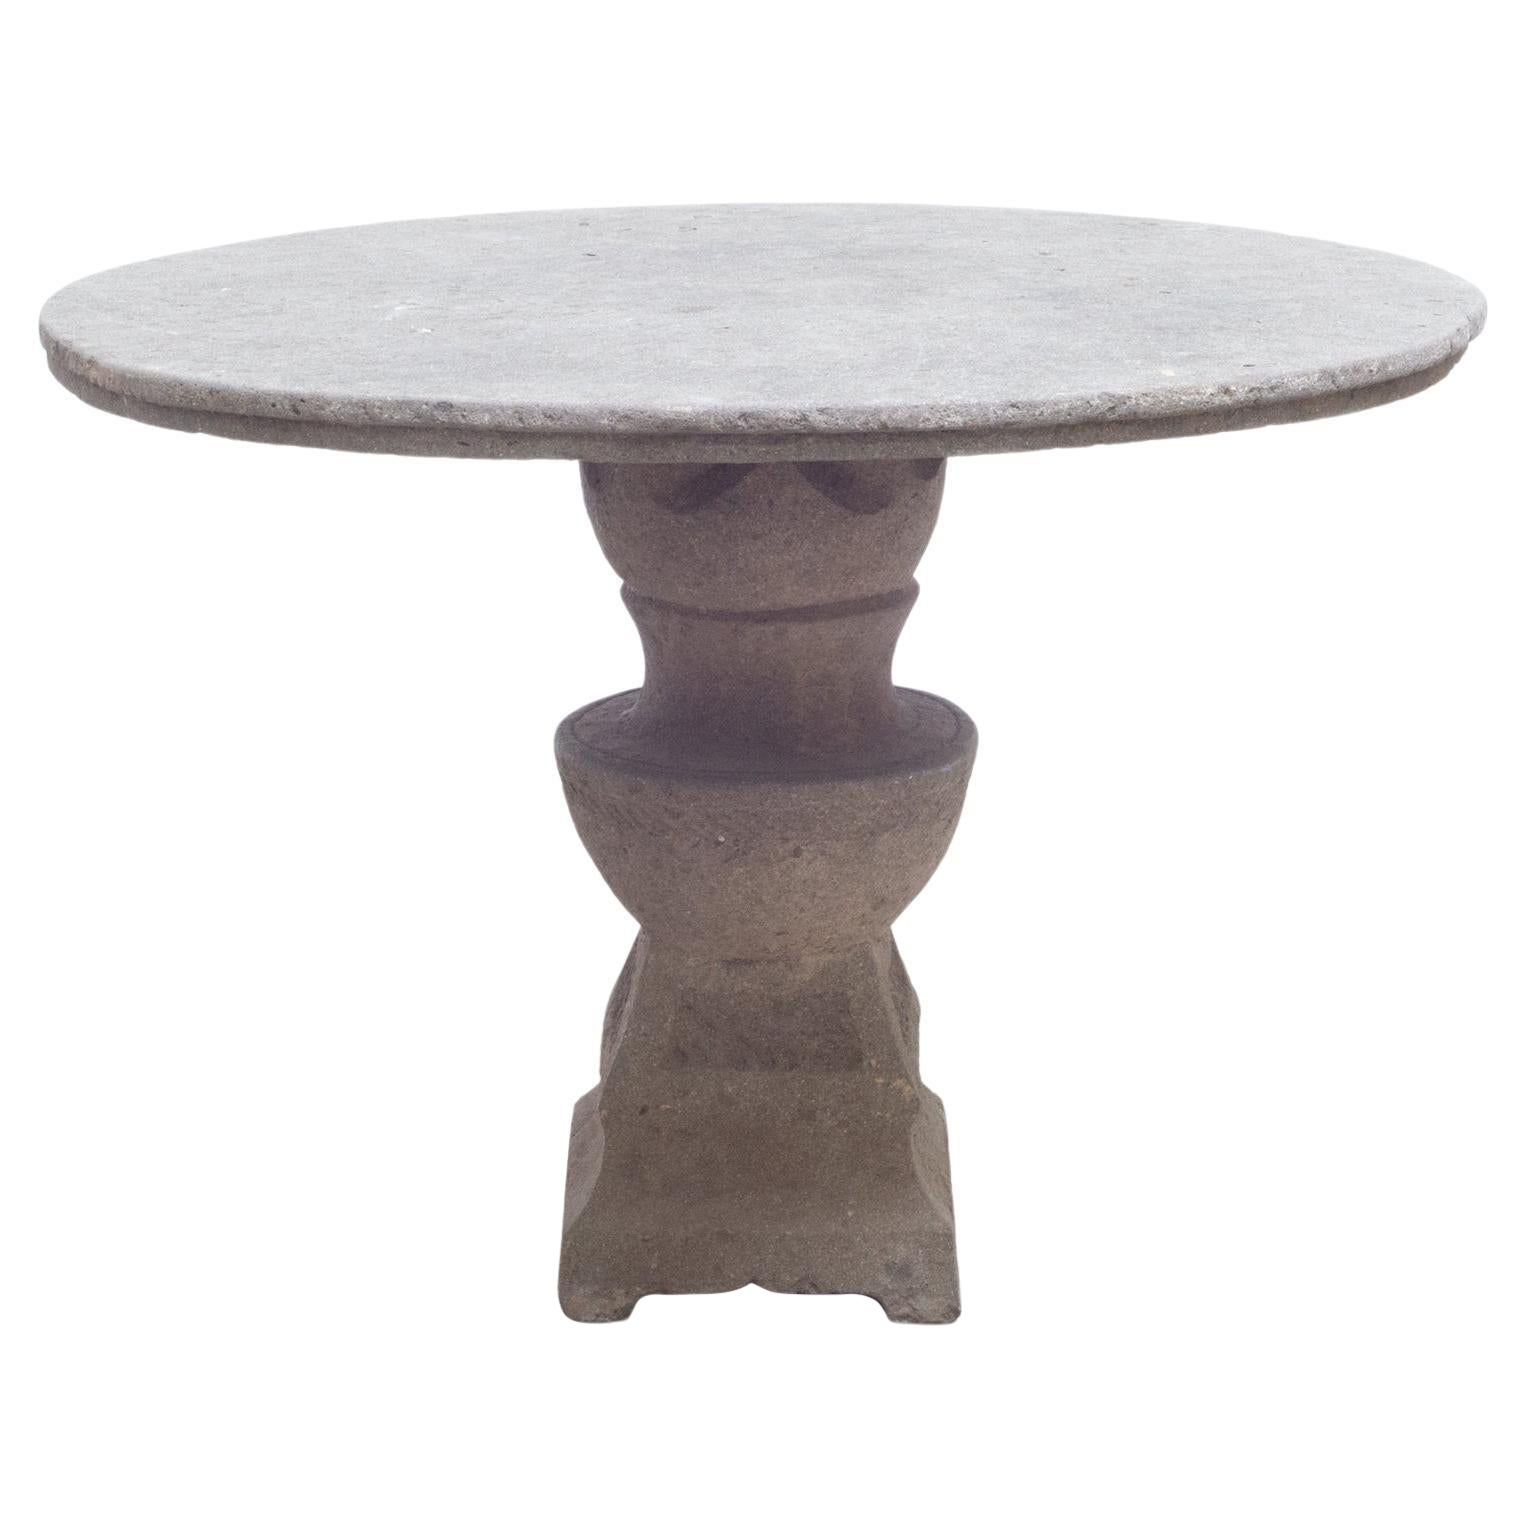 Early 20th C. French Cast Concrete Patio Garden Table c. 1910